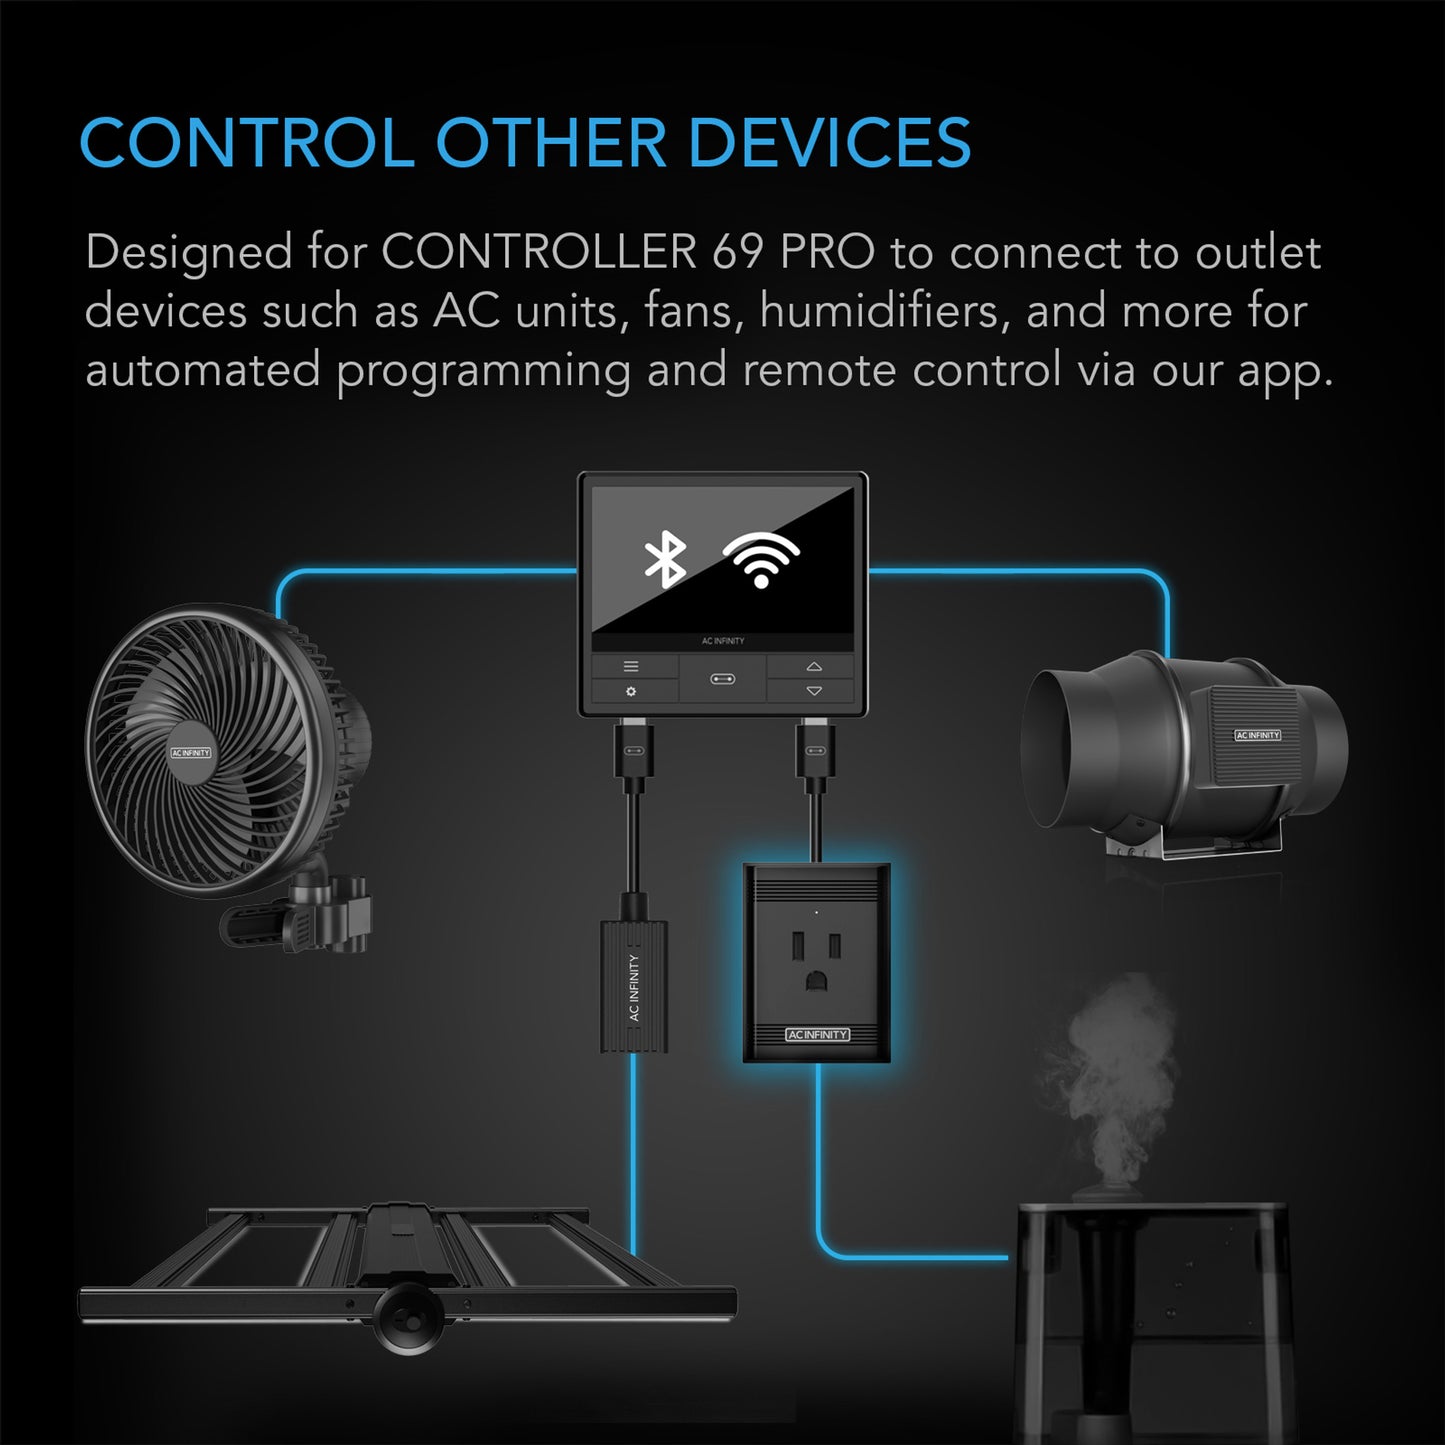 UIS CONTROL PLUG, FOR OUTLET-POWERED EQUIPMENT